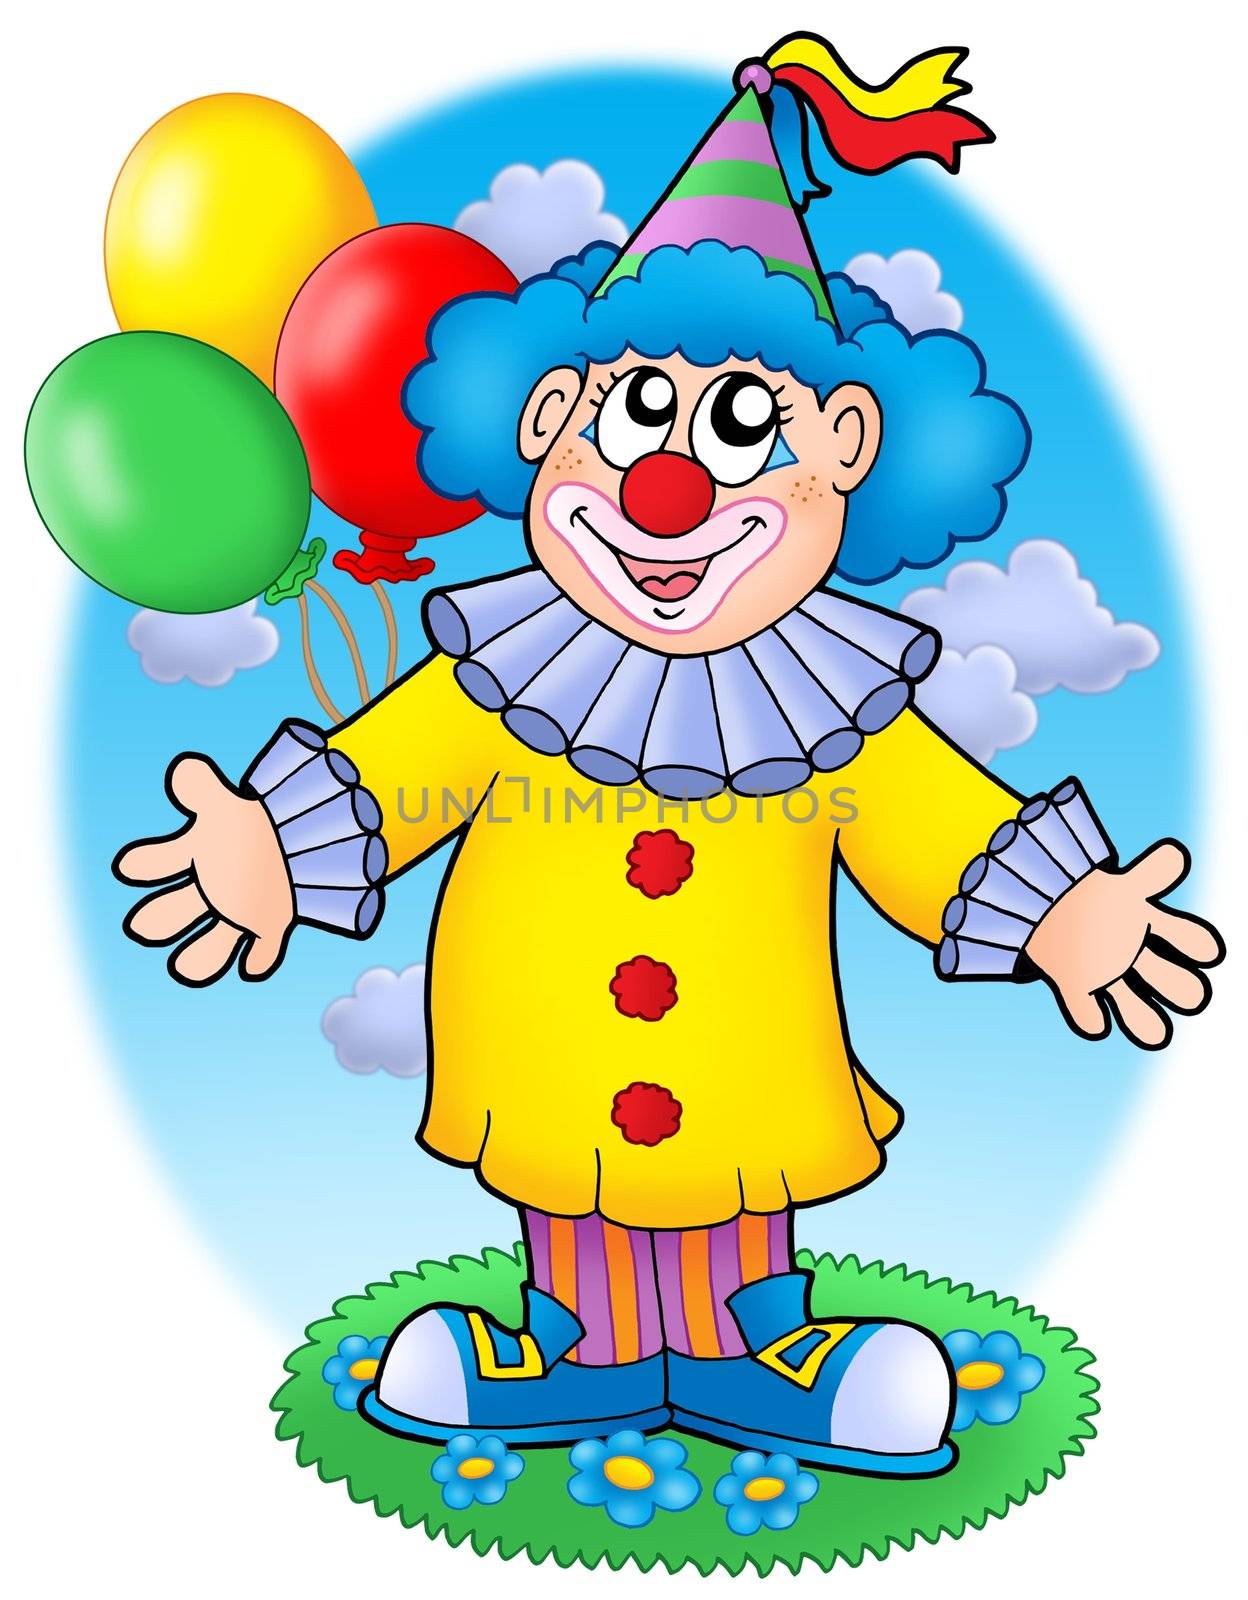 Smiling clown with balloons by clairev